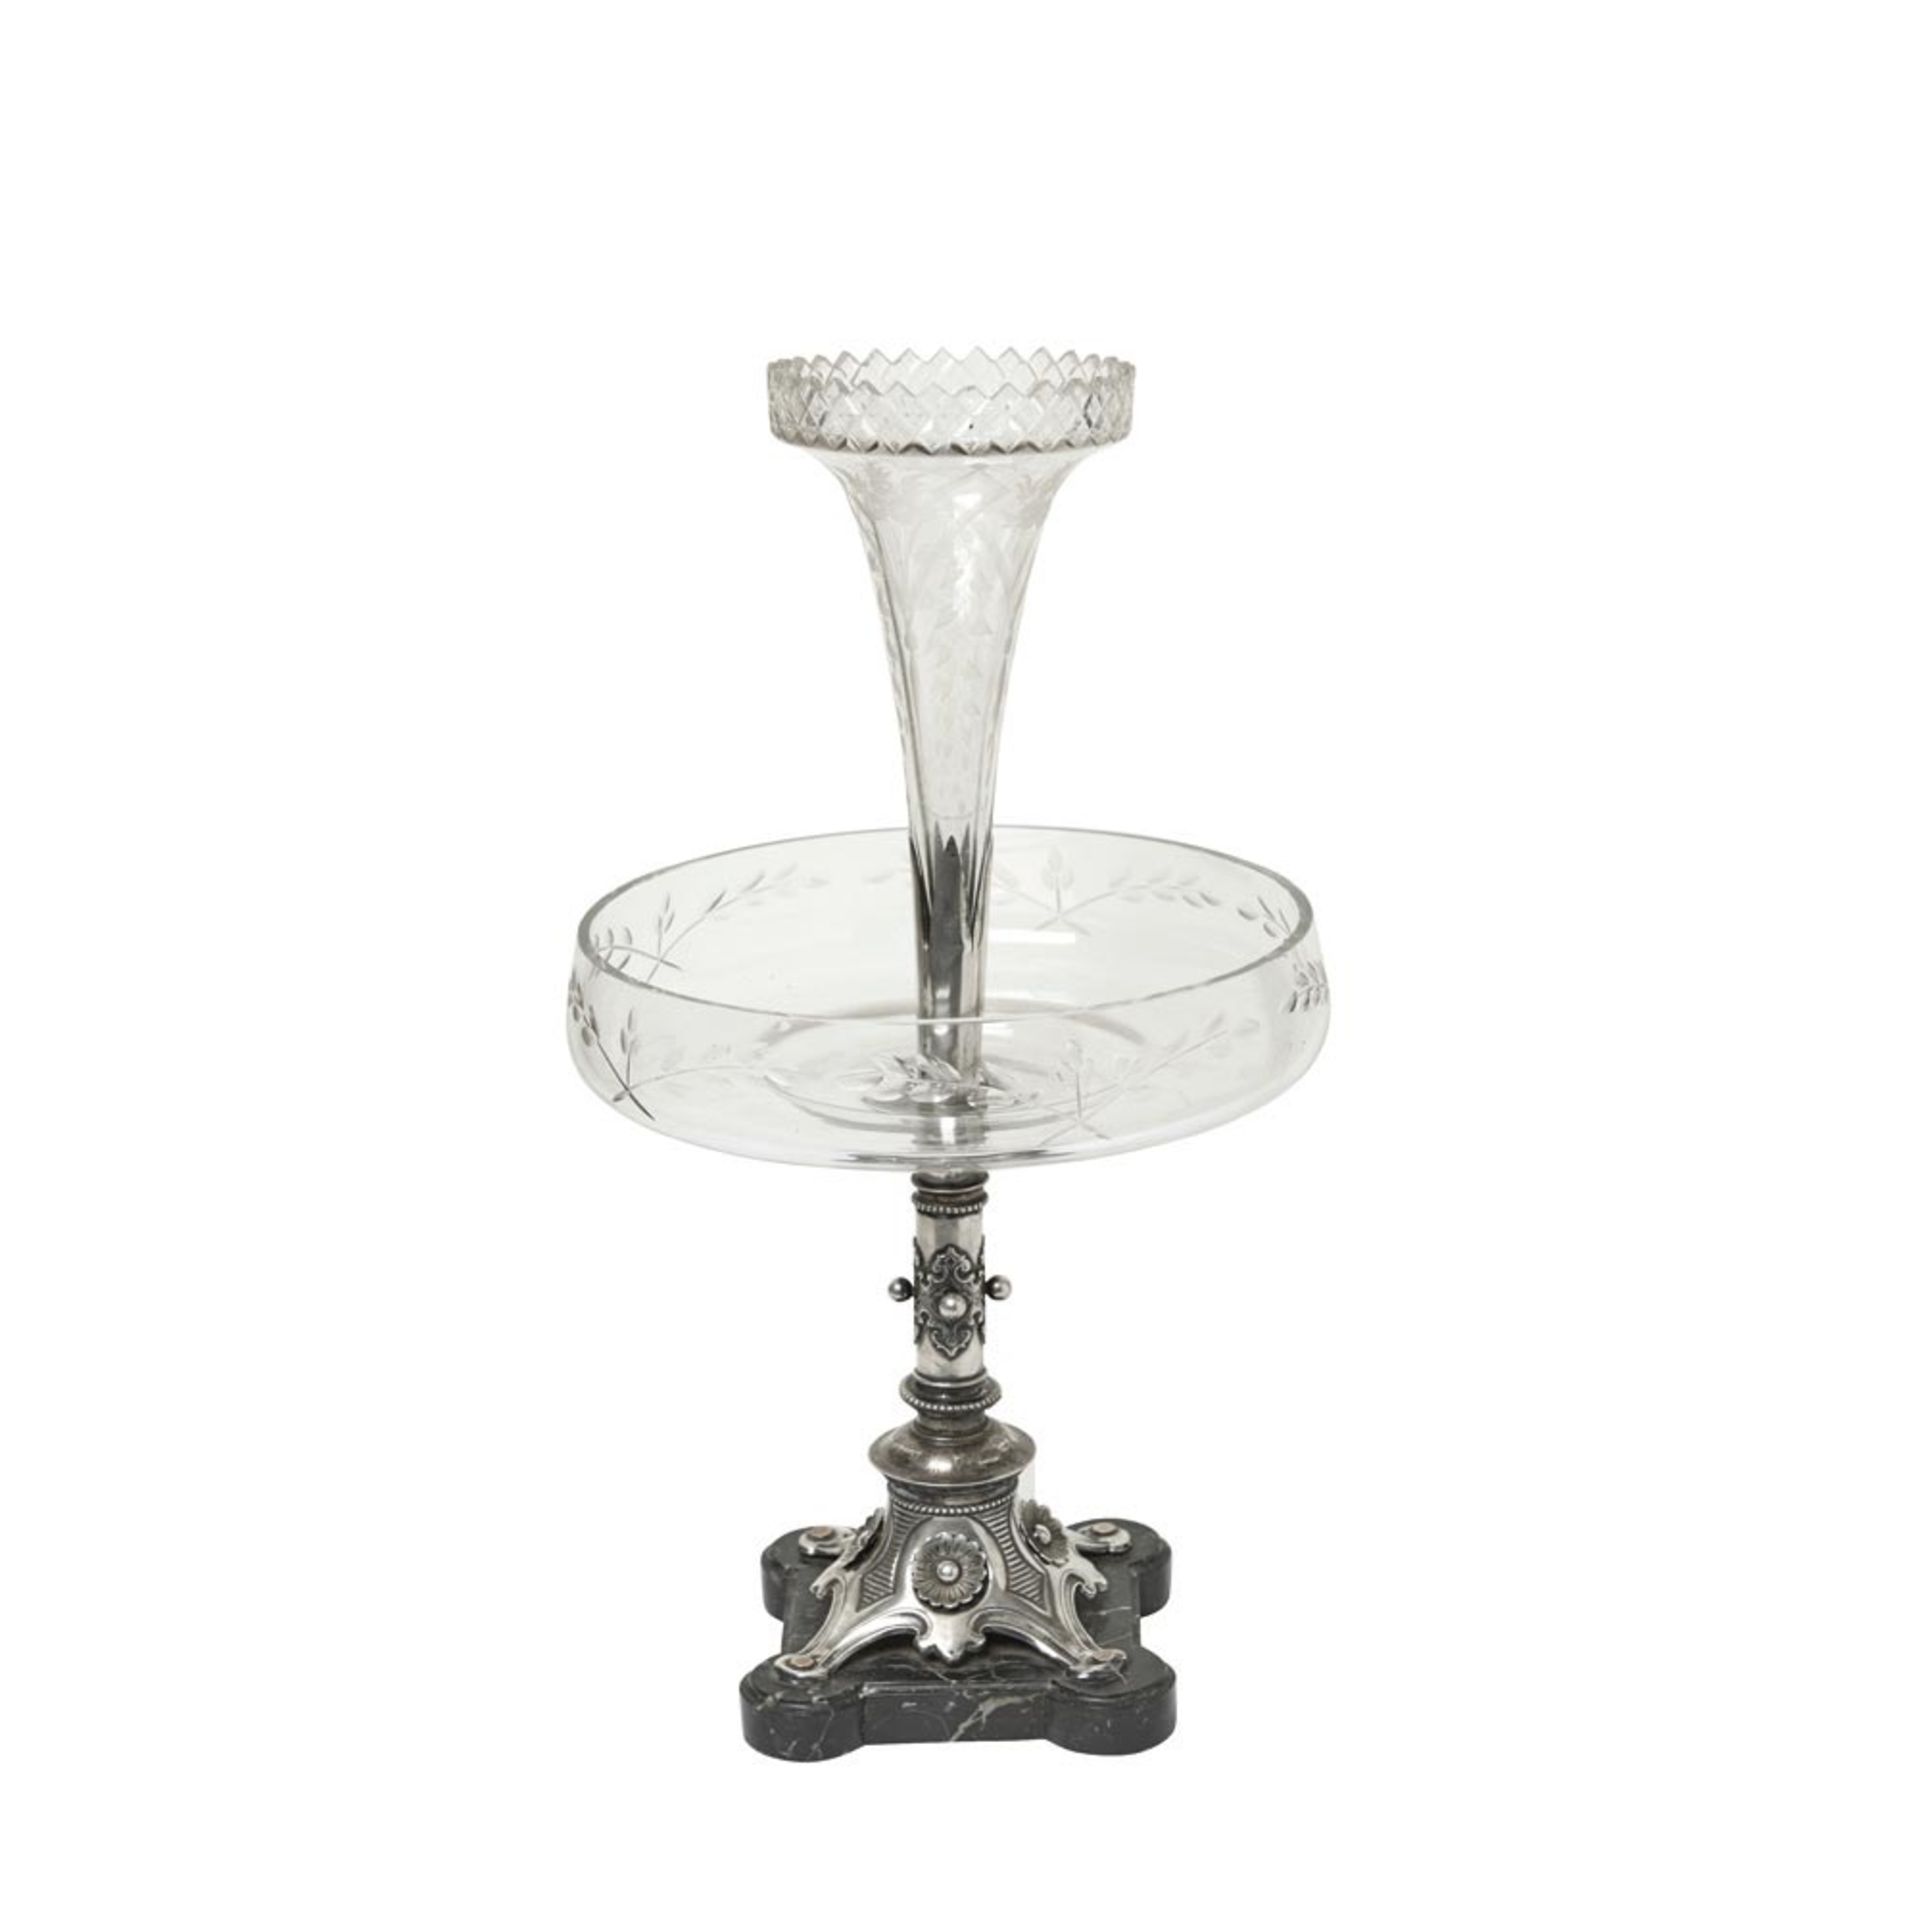 Glass and silver centrepiece, 19th century